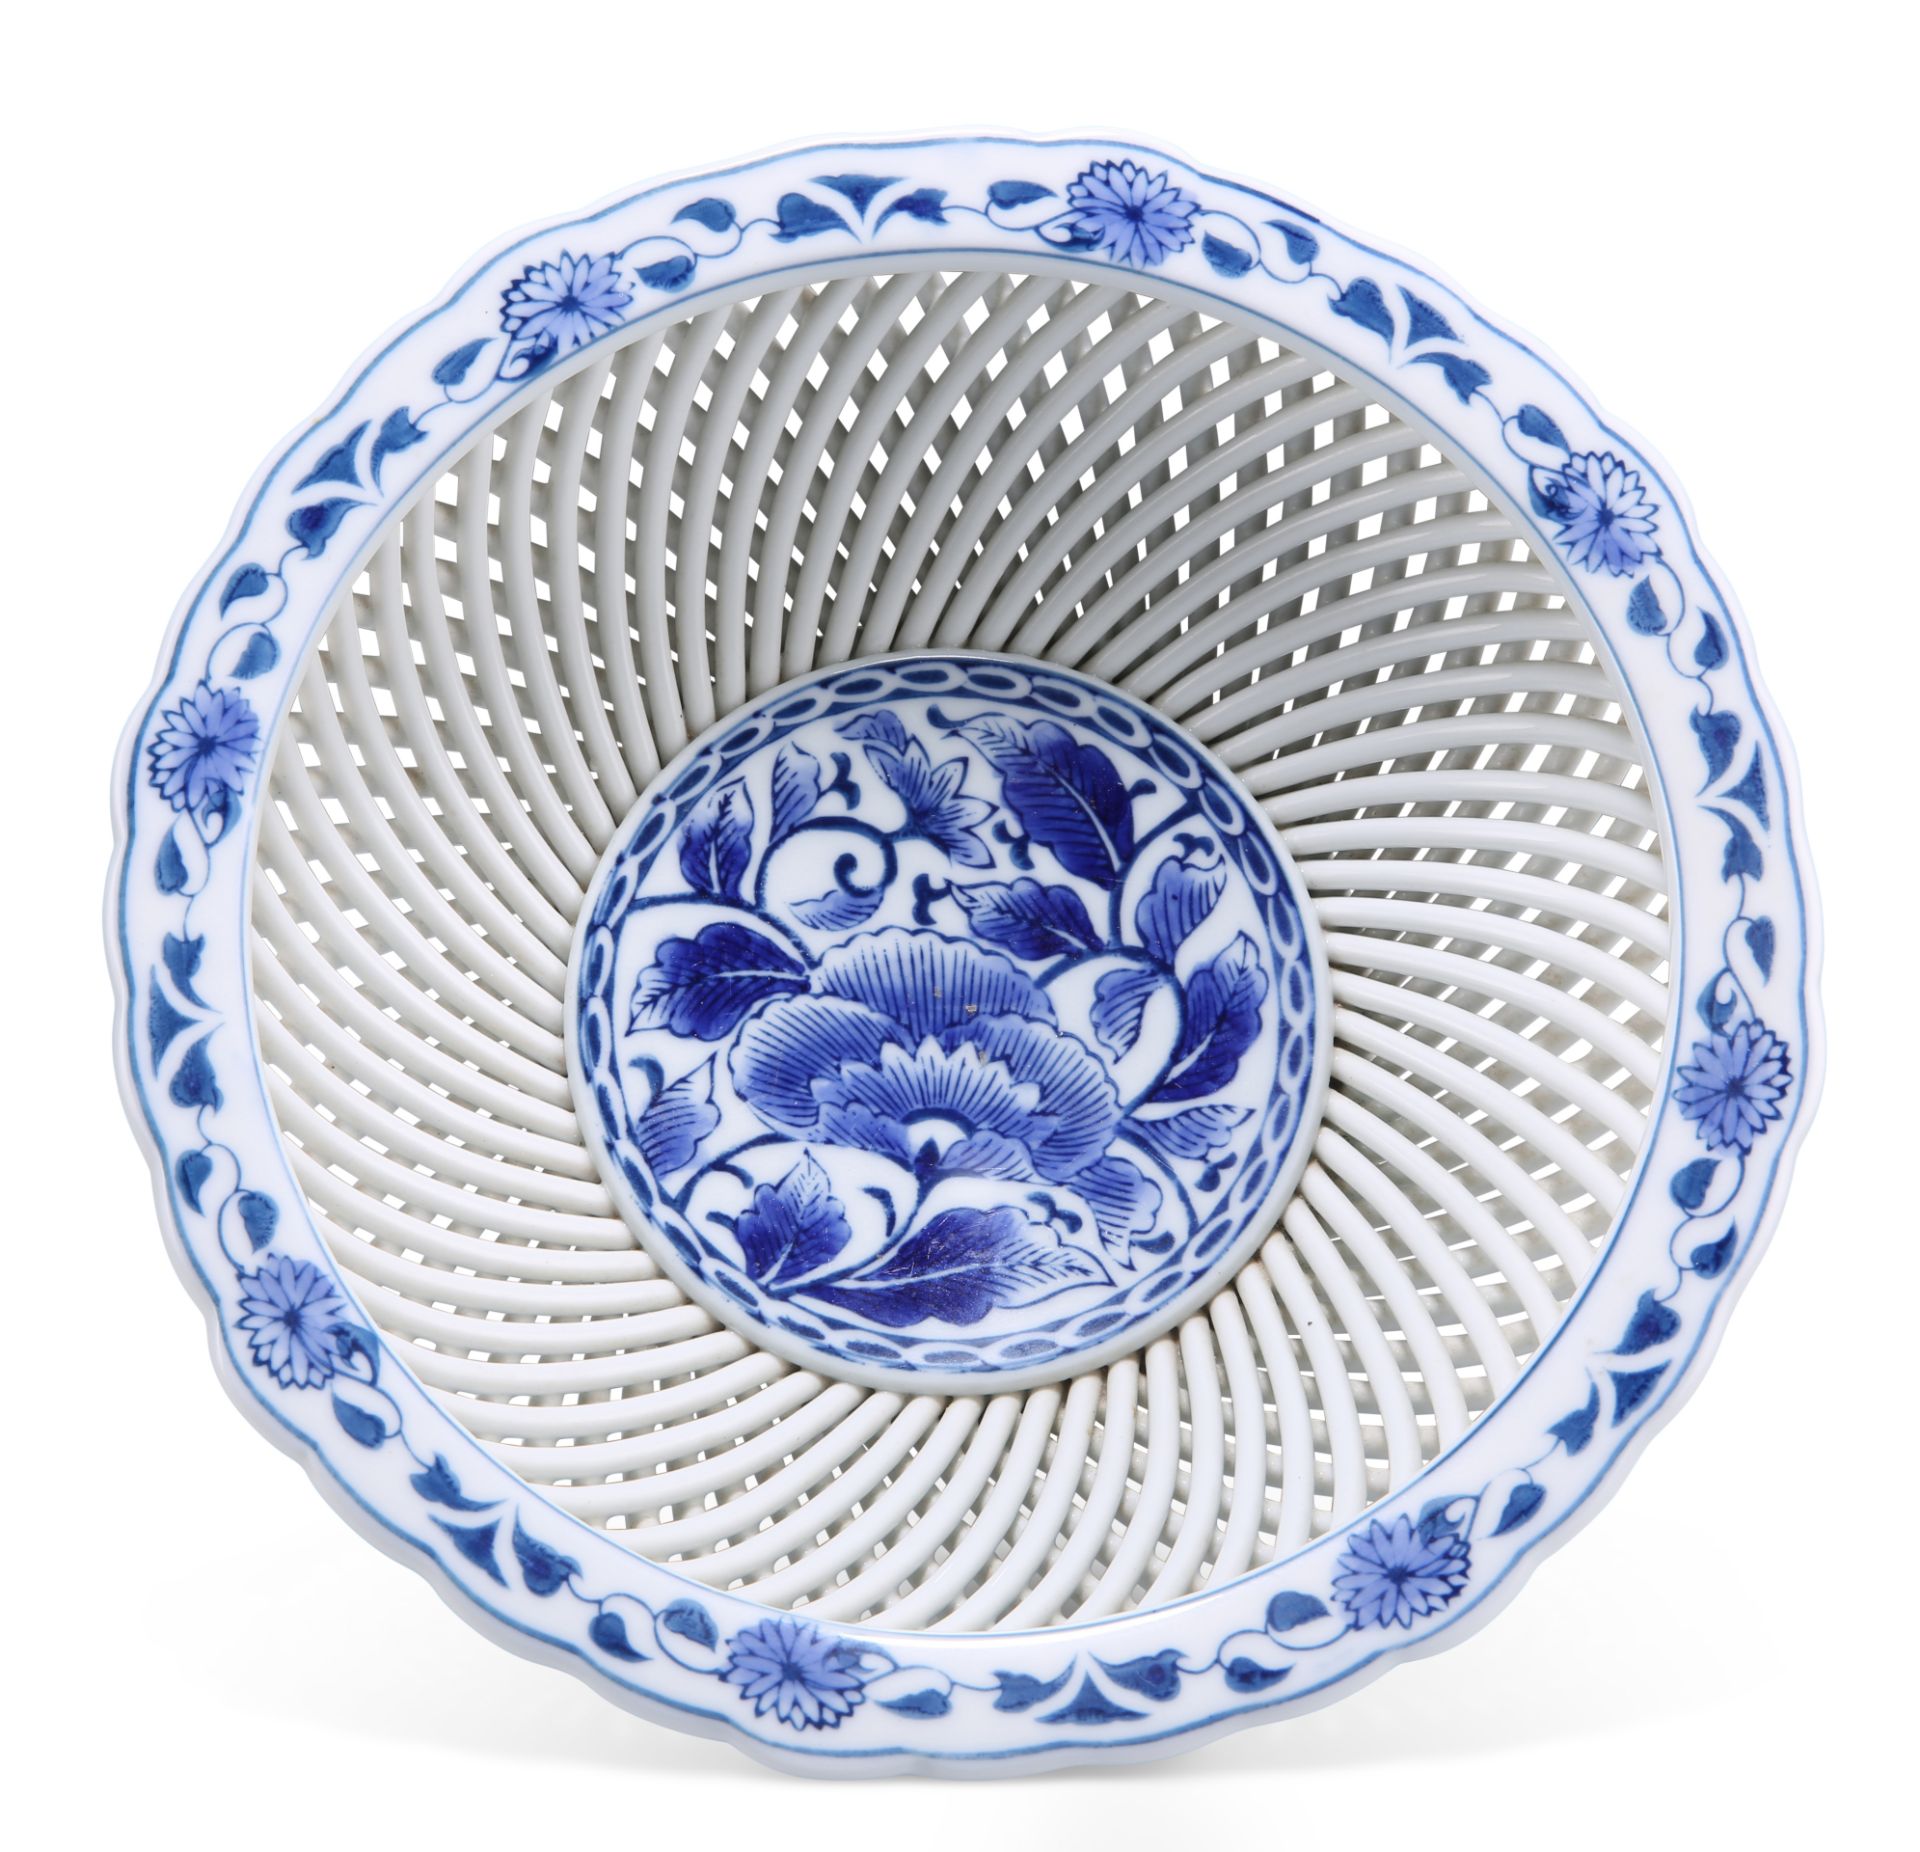 A CHINESE BLUE AND WHITE PORCELAIN FOOTED BOWL